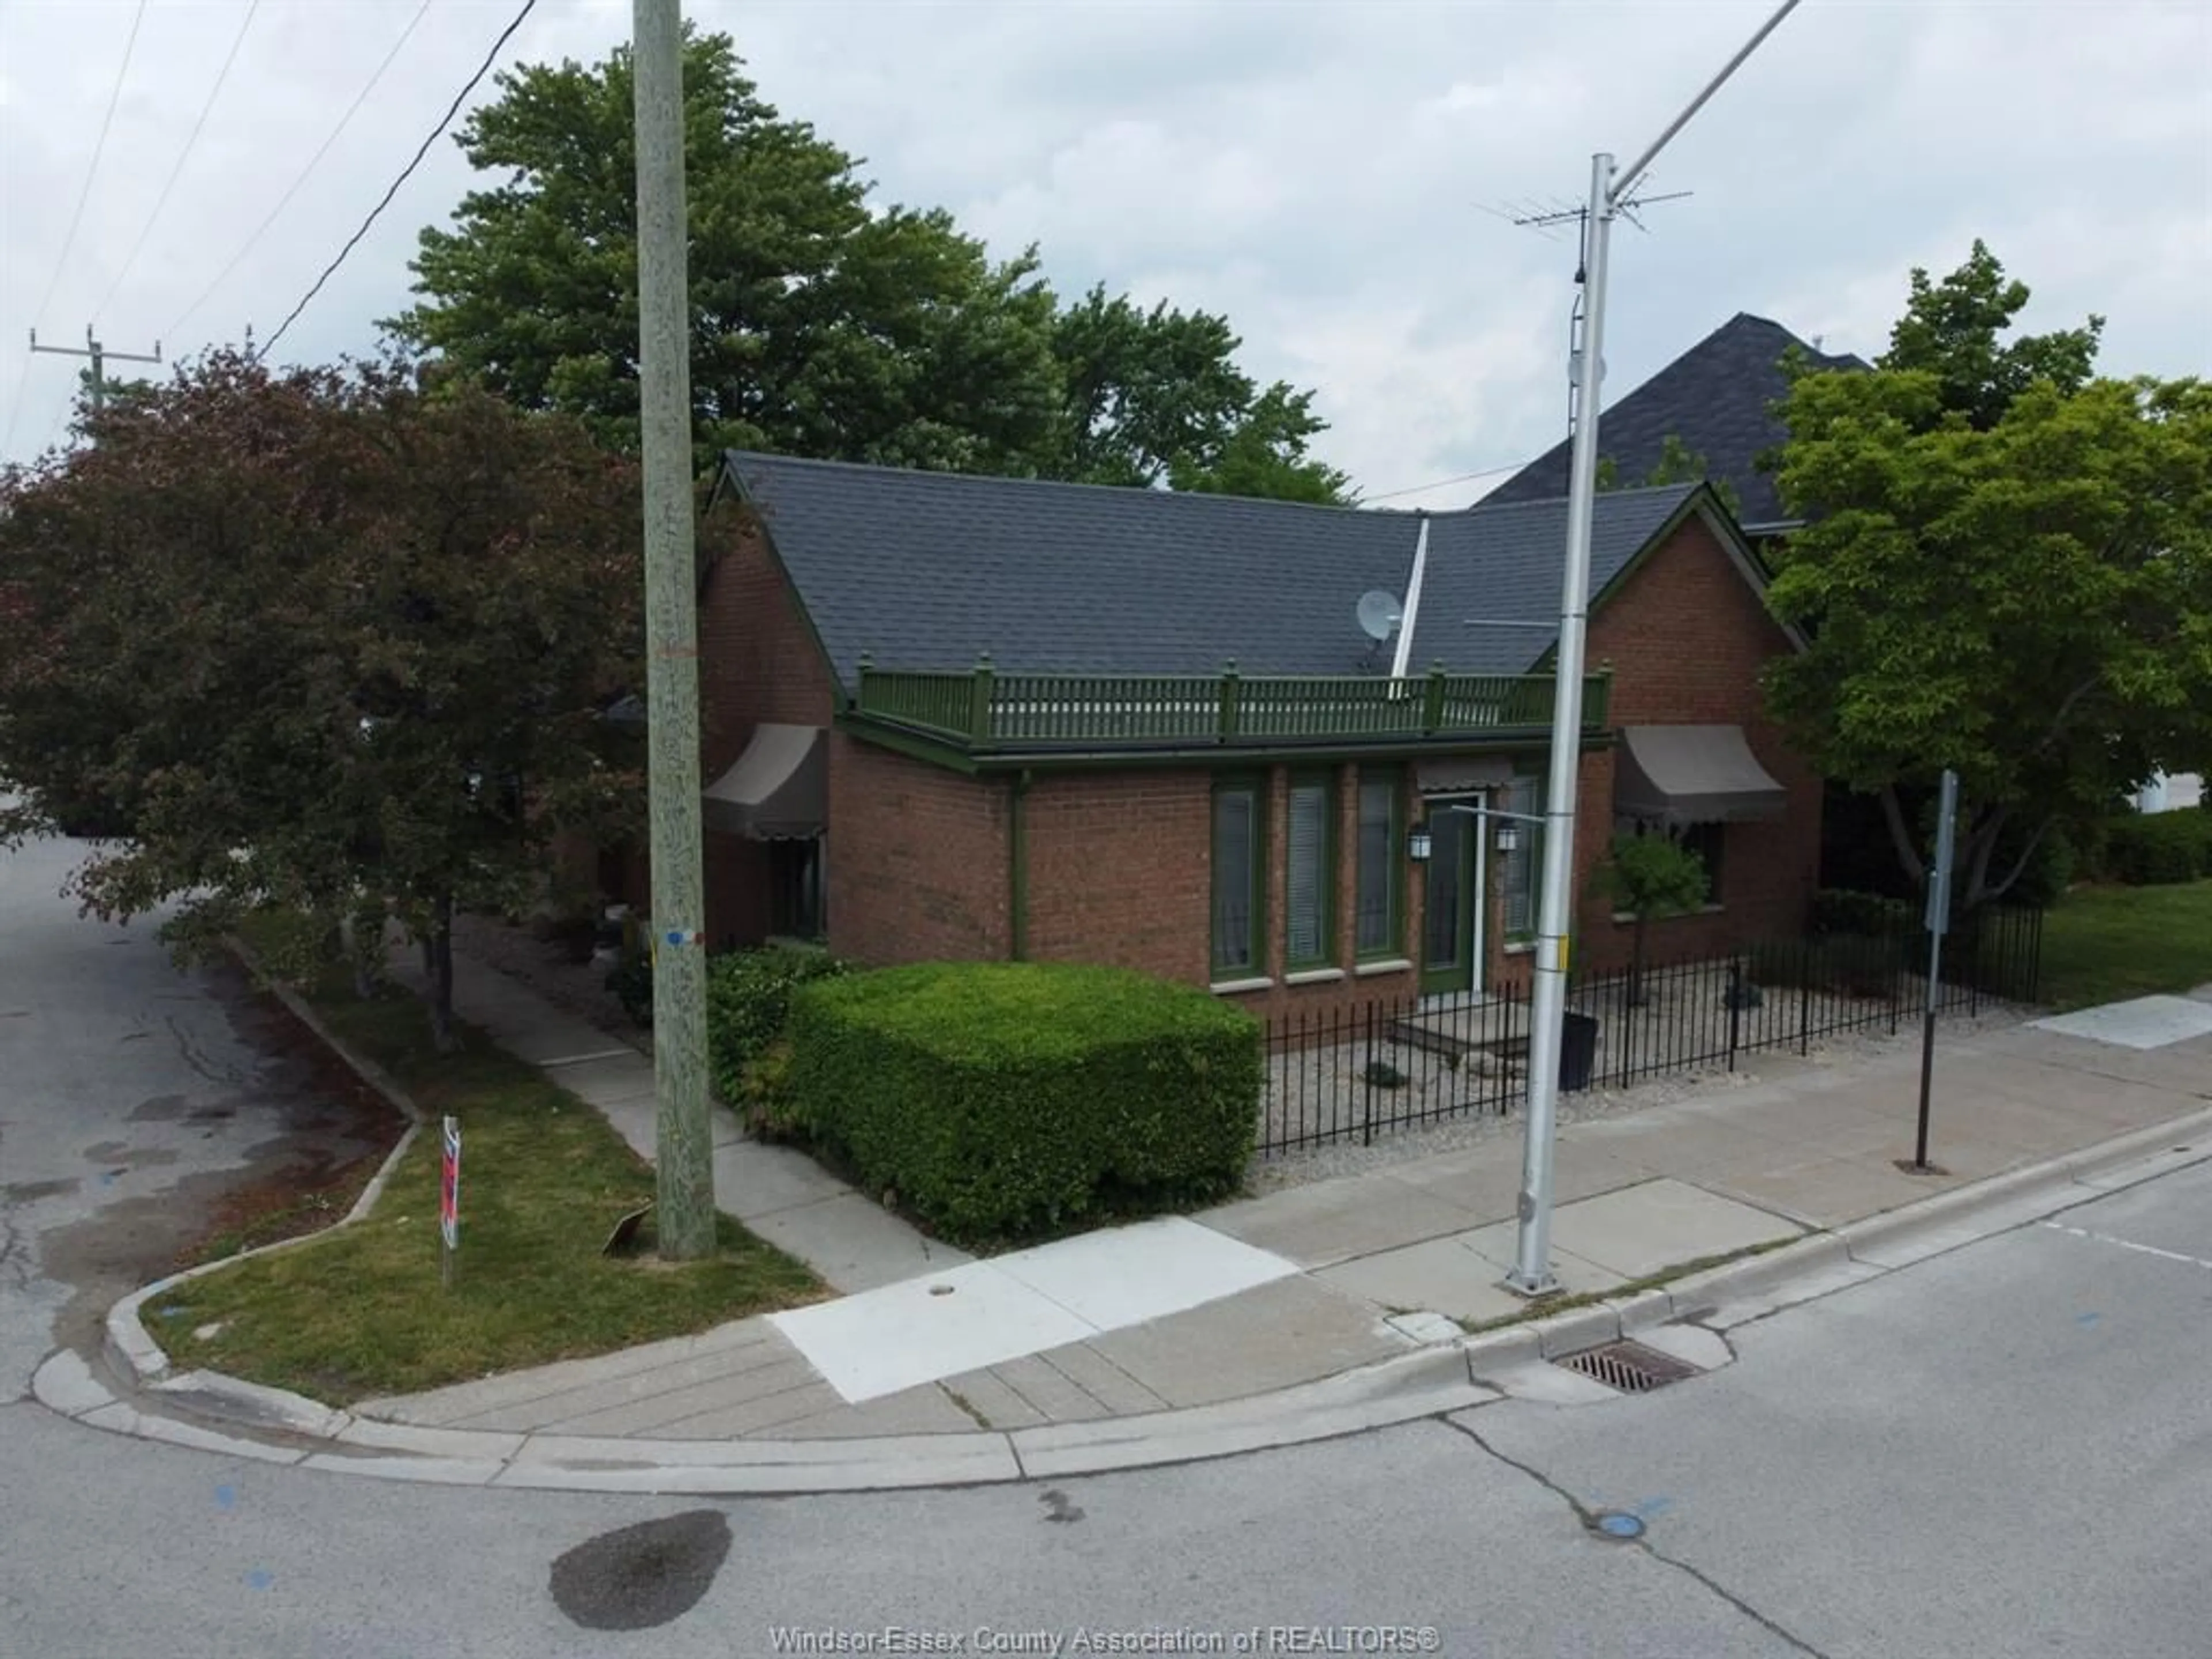 Street view for 49 TALBOT Rd, Wheatley Ontario N0P 2G0